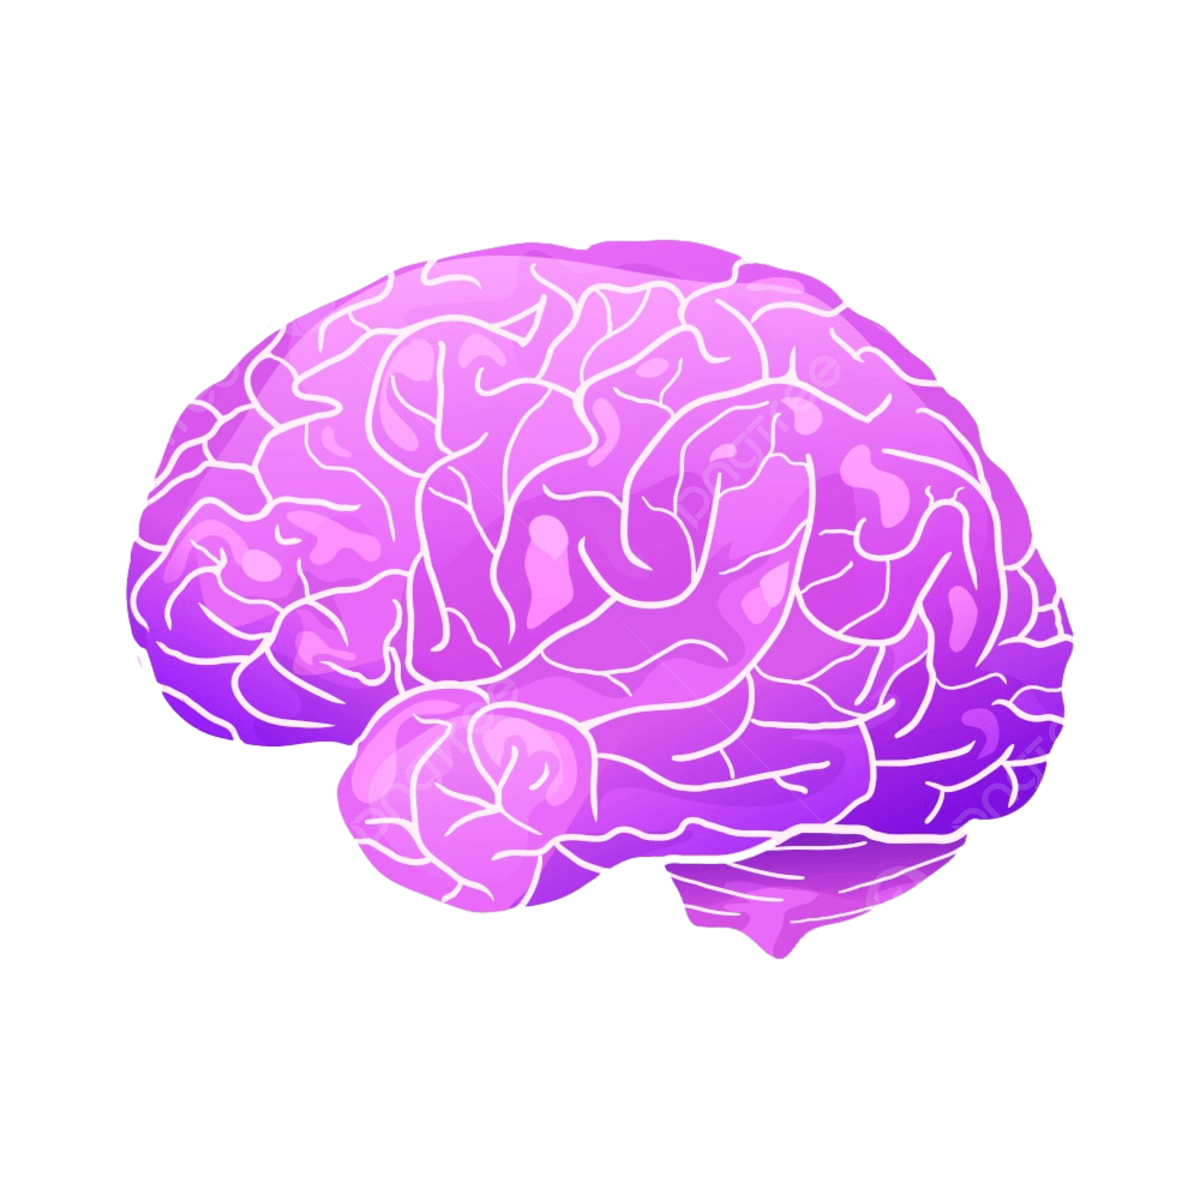 pngtree cartoon neon illustration of a human brain with highlights and shadows picture image 8069539